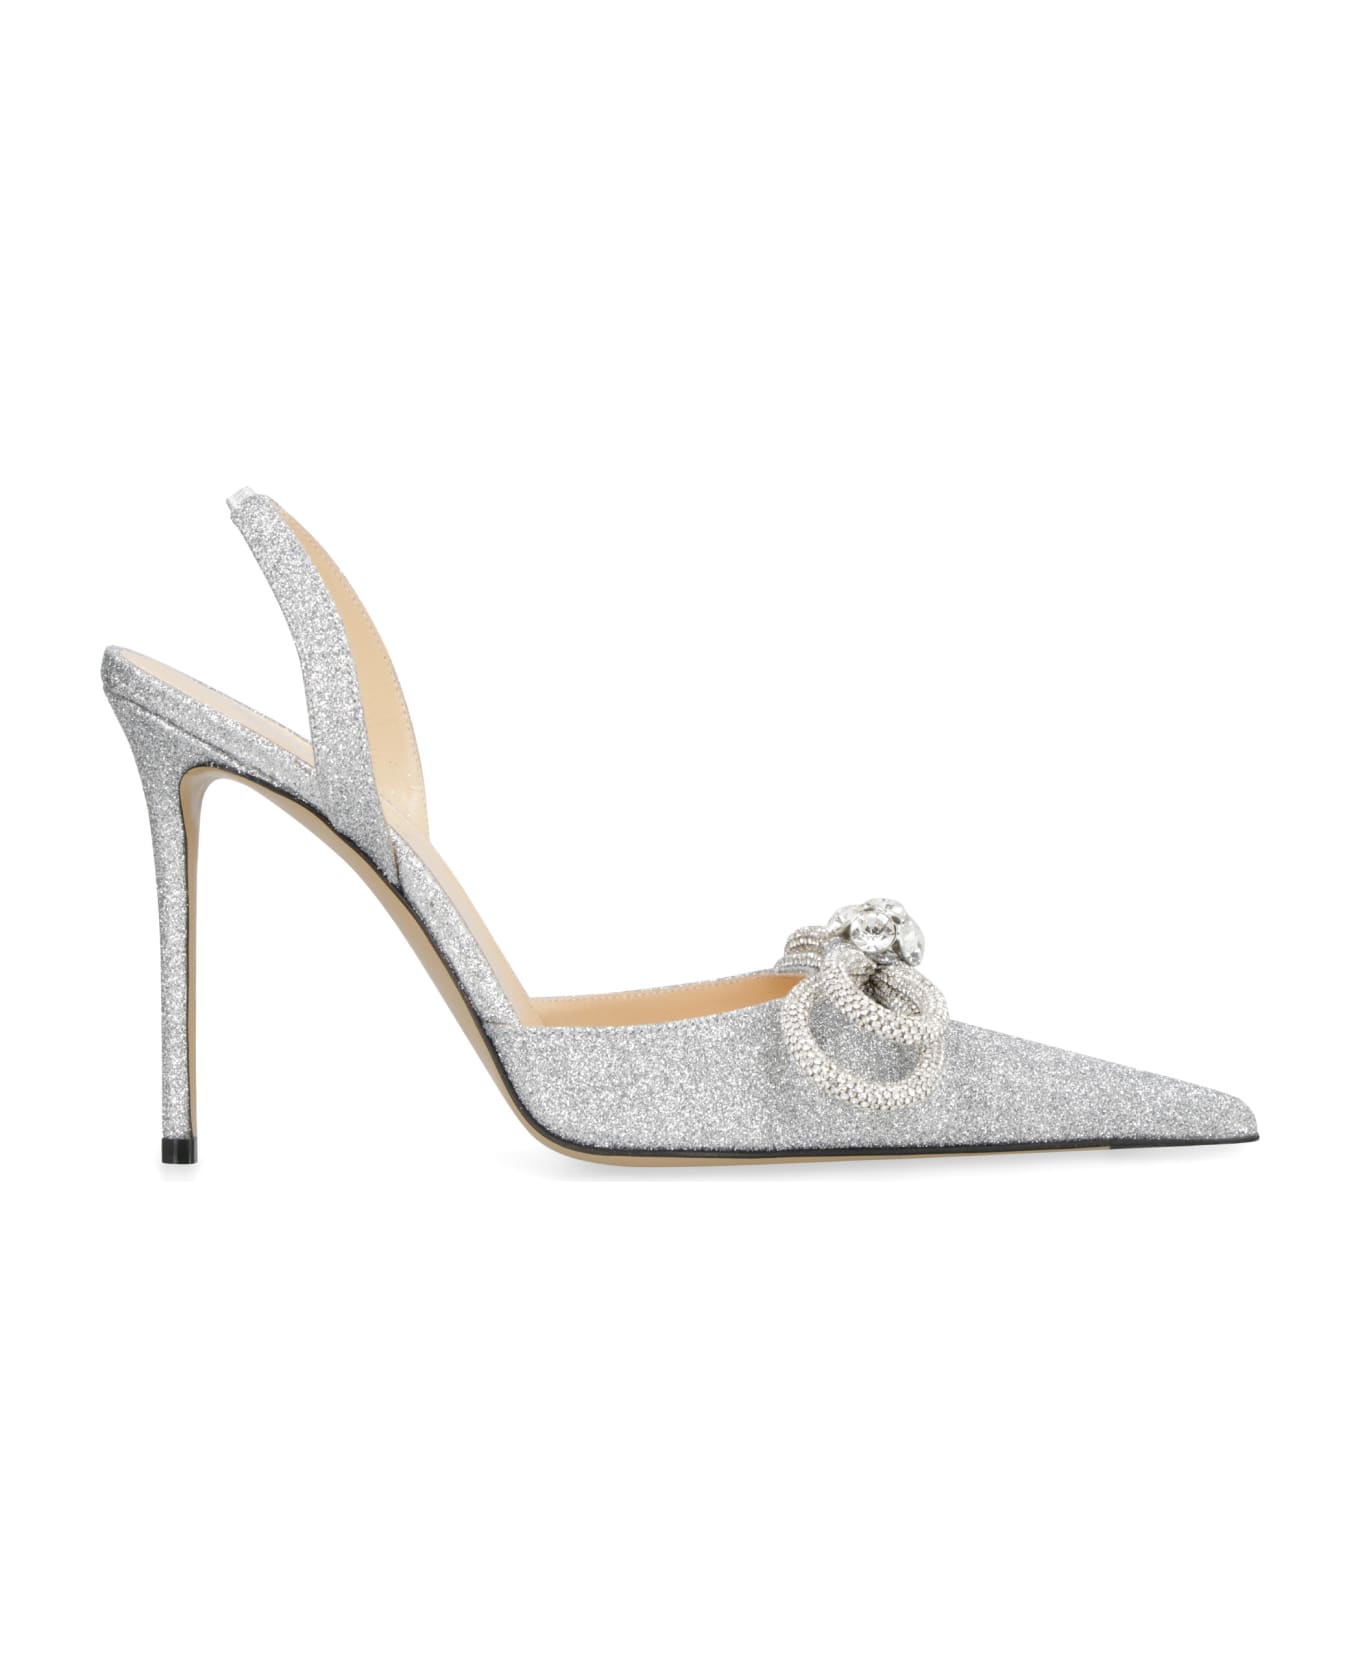 Mach & Mach Pumps Embellished Pointy-toe Slingback Pumps - Silver